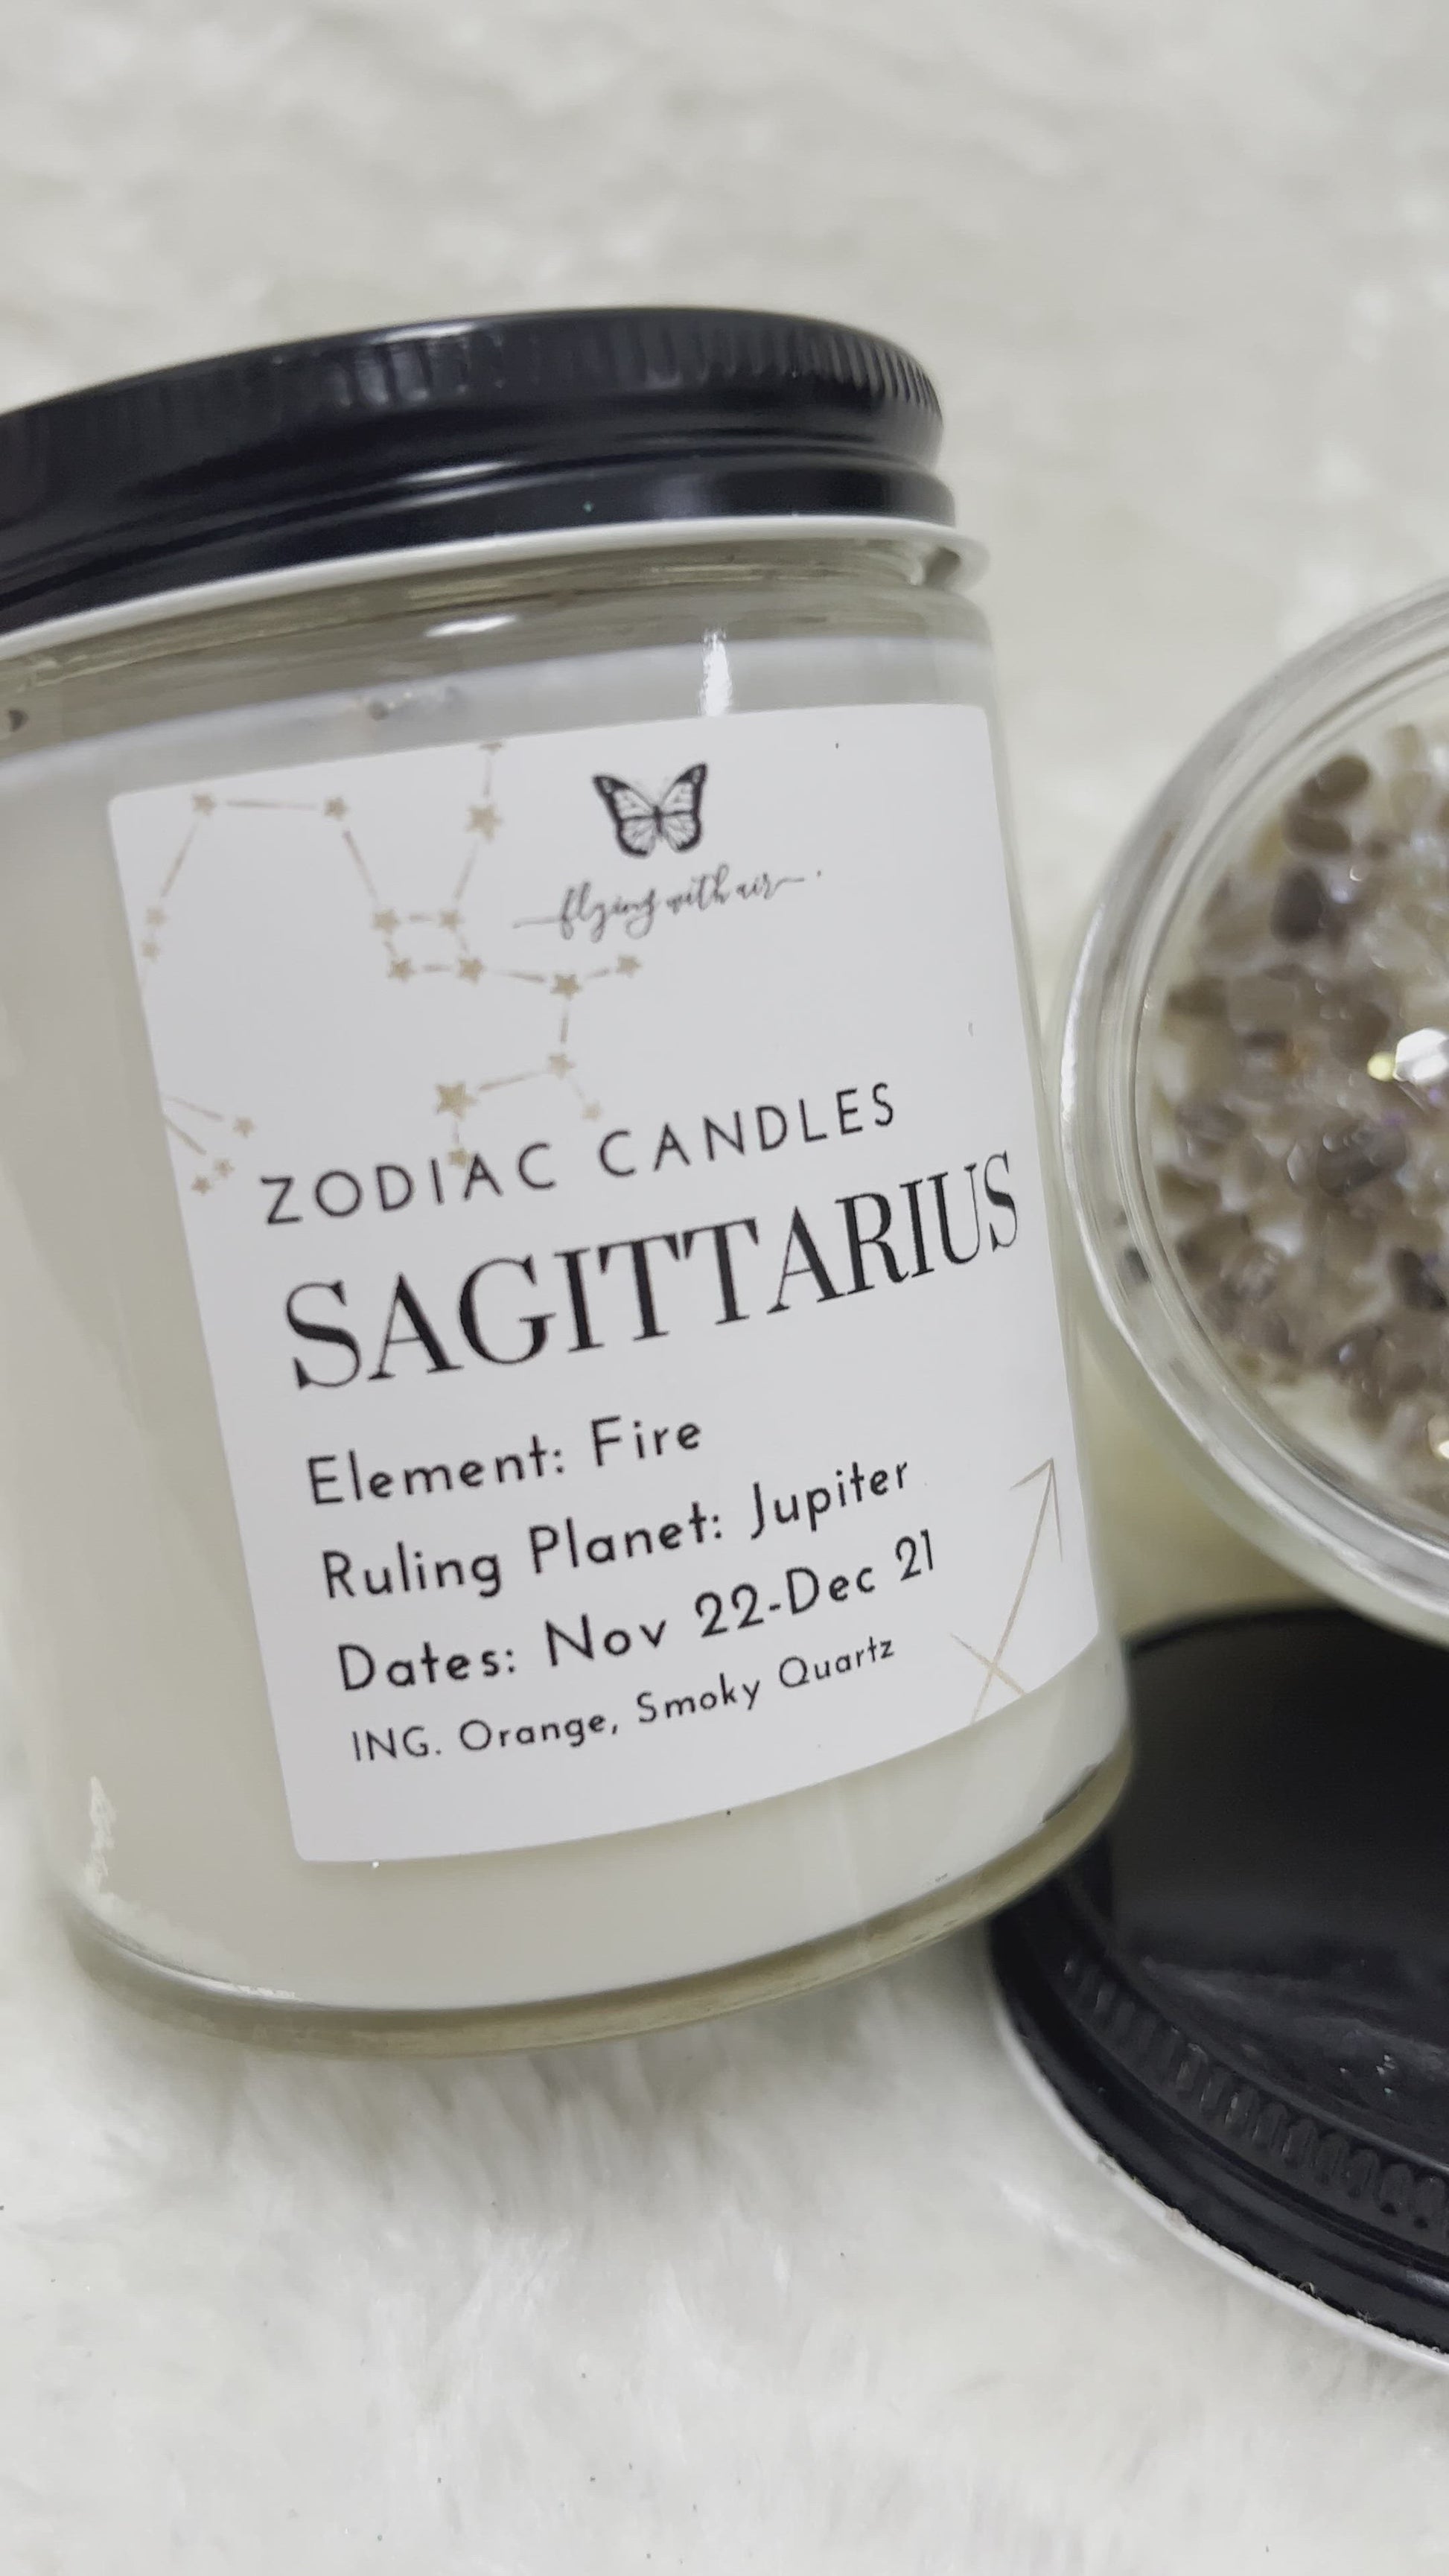 Sagittarius Zodiac Candle A delightful soy based, magical candle for your relaxation and fulfillment of confidence in accordance to your zodiac sign.  Product Properties  Volume: 6 oz glass jar  Burn Time: 10-15 hours  Primary Color: White  Scent: Orange Crystal Energy: Smoky Quartz Tumbled, Smoky Quartz Chips